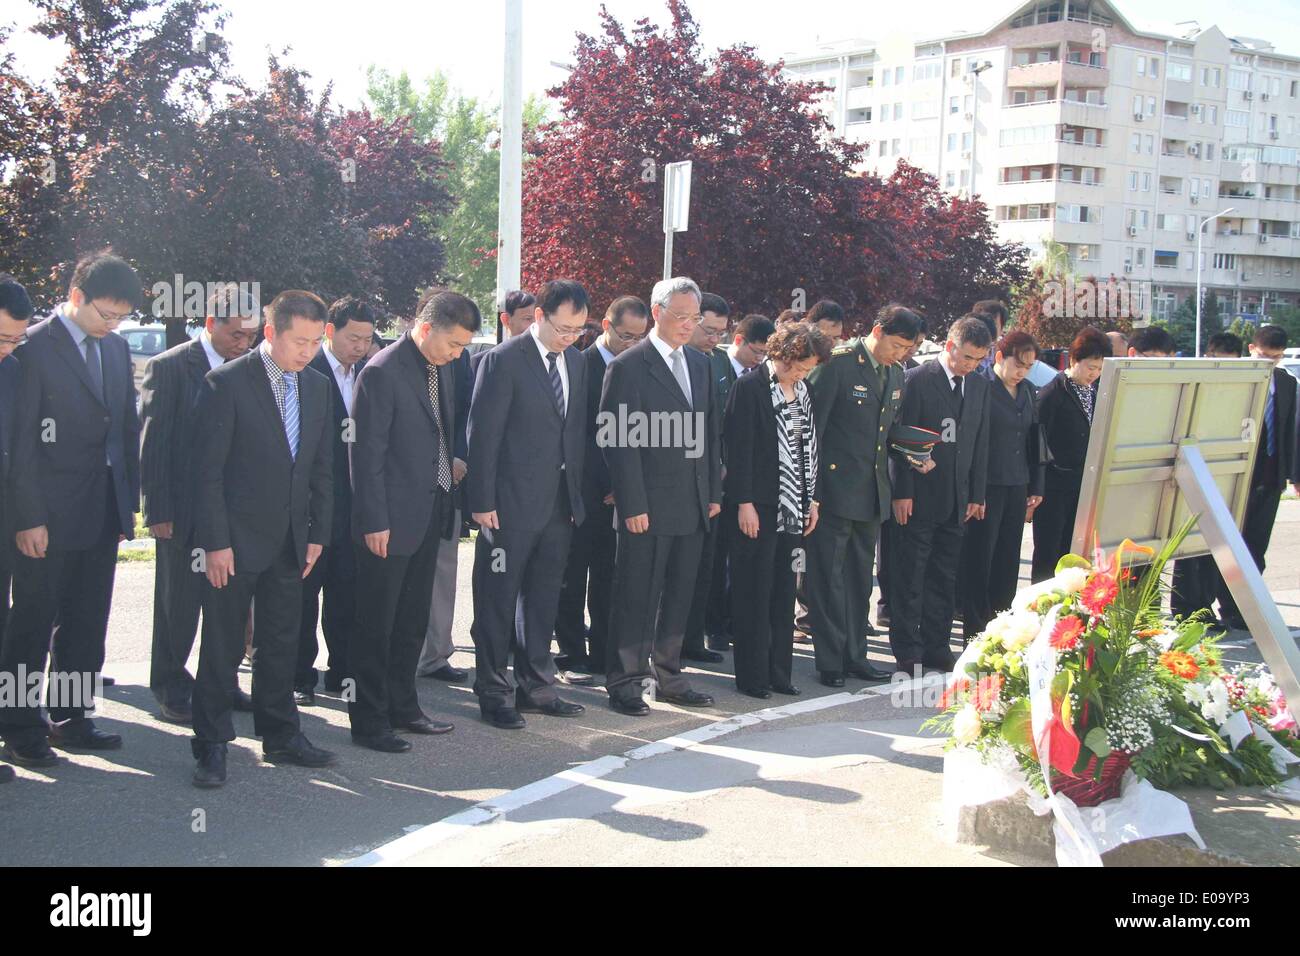 Belgrade, May 7. 7th May, 1999. Chinese ambassador to Serbia Zhang Wanxue (4th L, Front row) shows respect for three Chinese journalists killed in the U.S.-led NATO bombing of the Chinese embassy in Belgrade, in front of a monument in Belgrade, capital of Serbia, on May 7, 2014. Shao Yunhuan of Xinhua News Agency along with Xu Xinghu and his wife Zhu Ying from the Beijing-based Guangming Daily newspaper were killed in the missile attack which inflicted serious damage to the embassy buildings on the evening of May 7, 1999. Credit:  Wang Hui/Xinhua/Alamy Live News Stock Photo